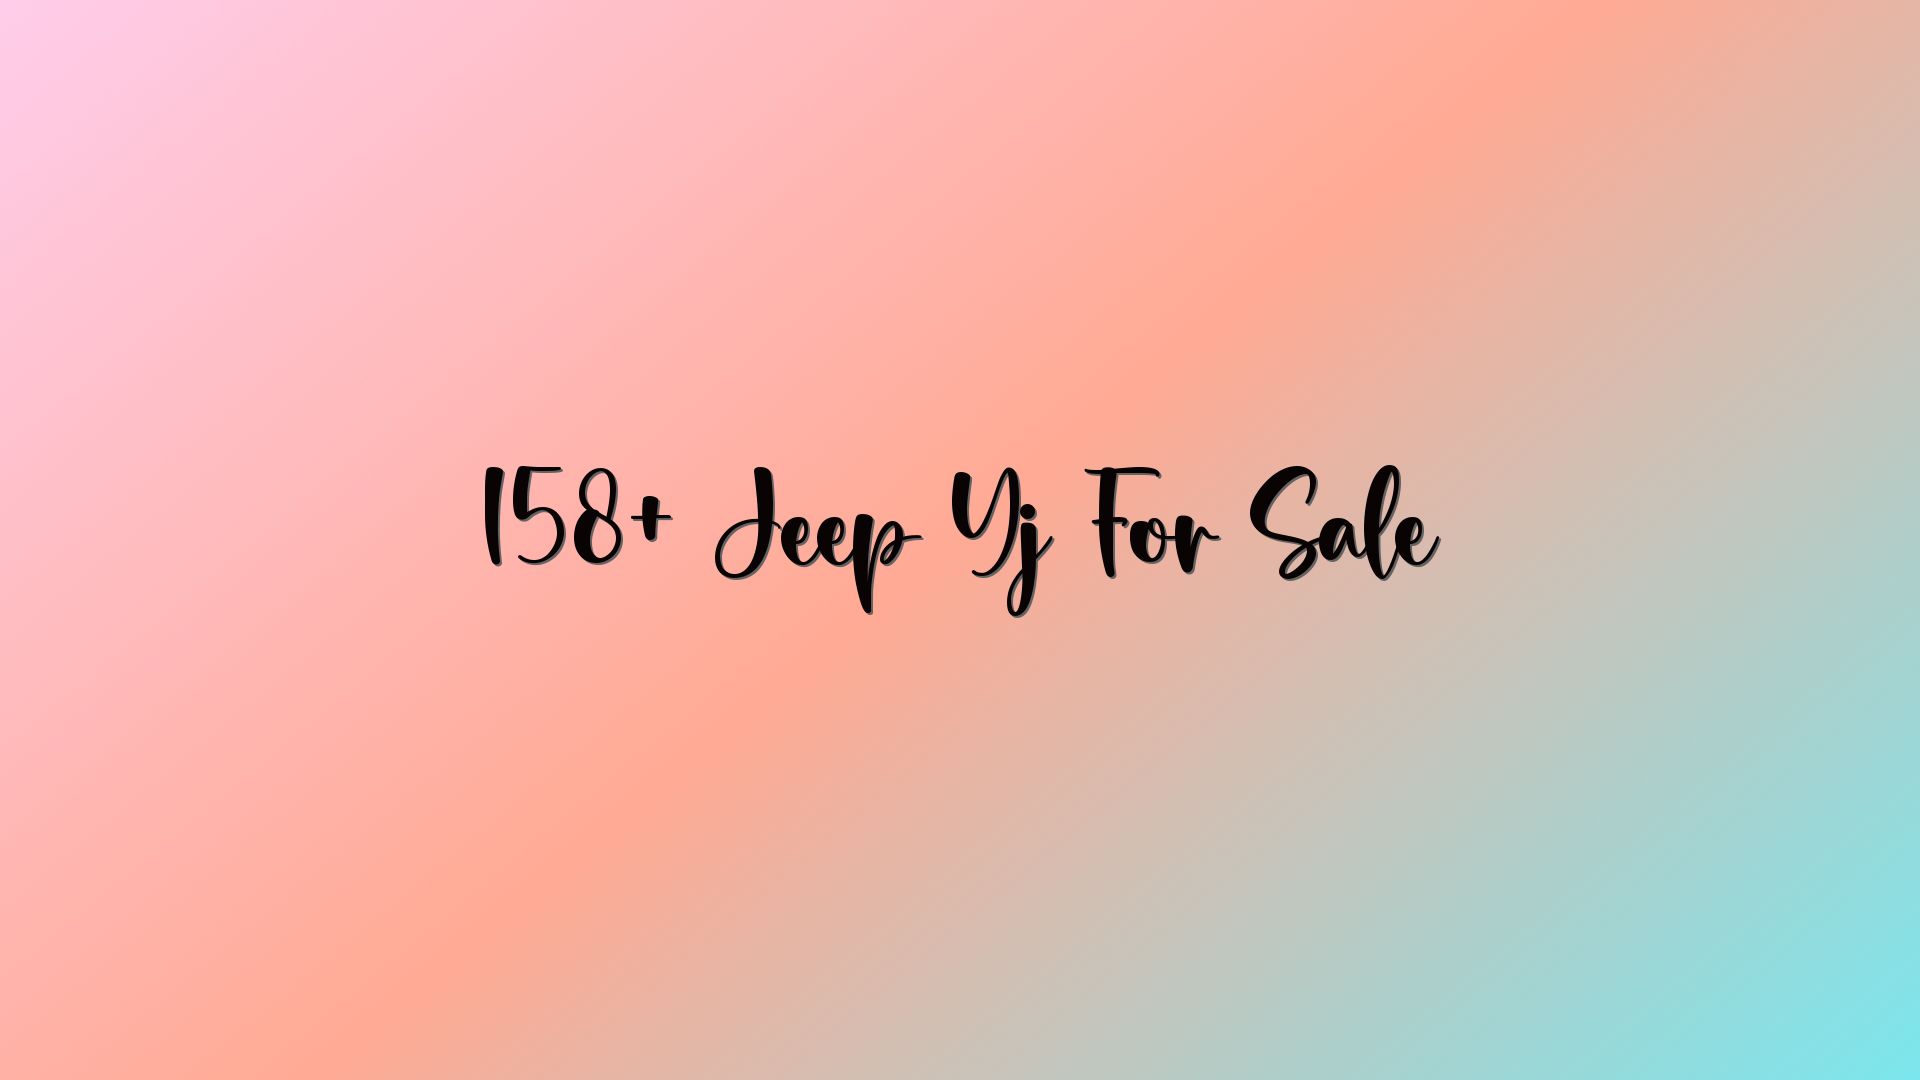 158+ Jeep Yj For Sale